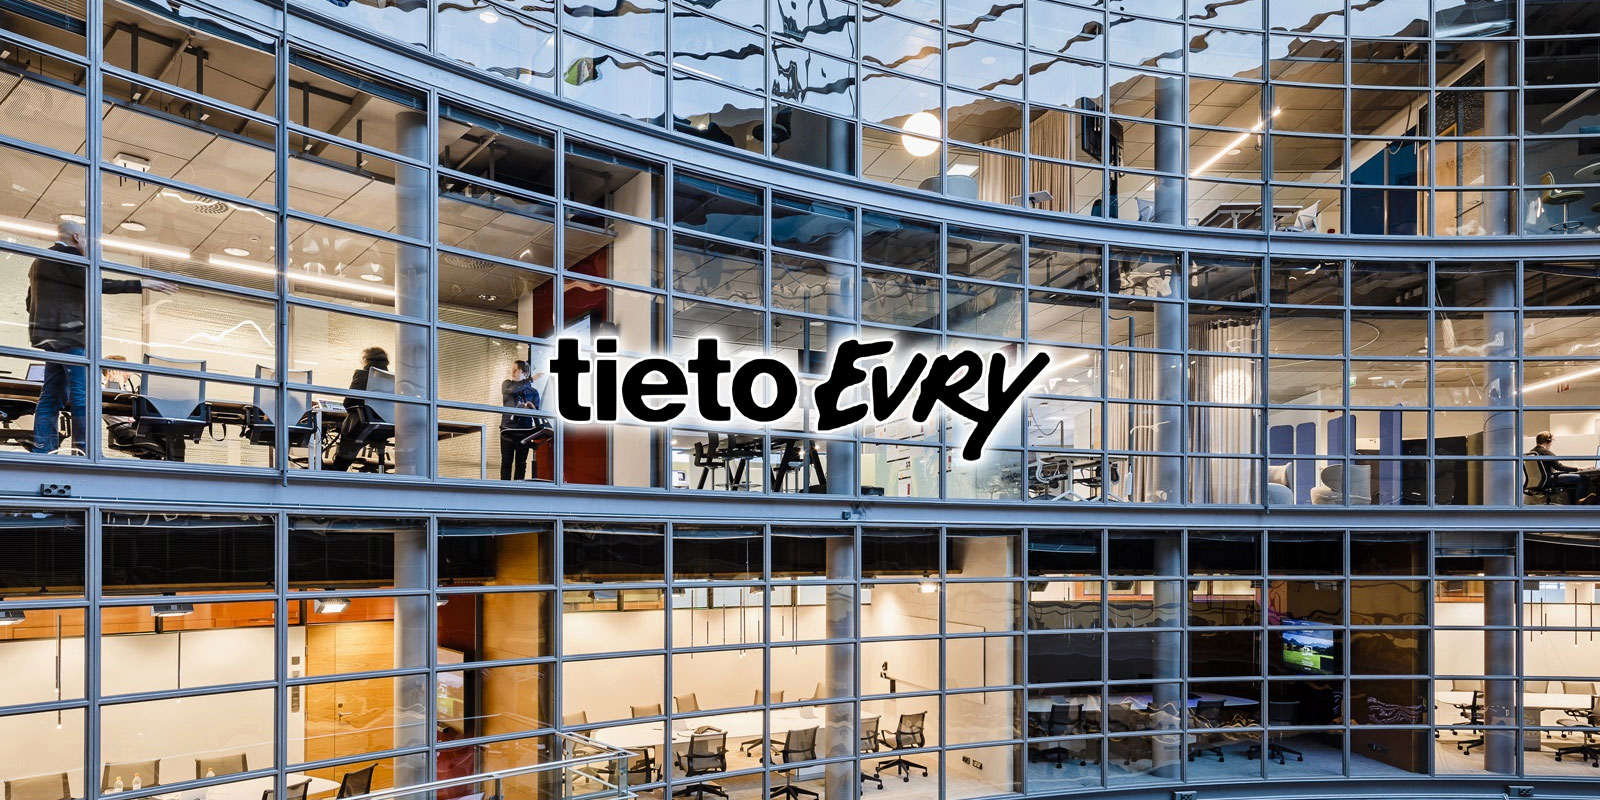 finnish it services giant tietoevry discloses ransomware attack